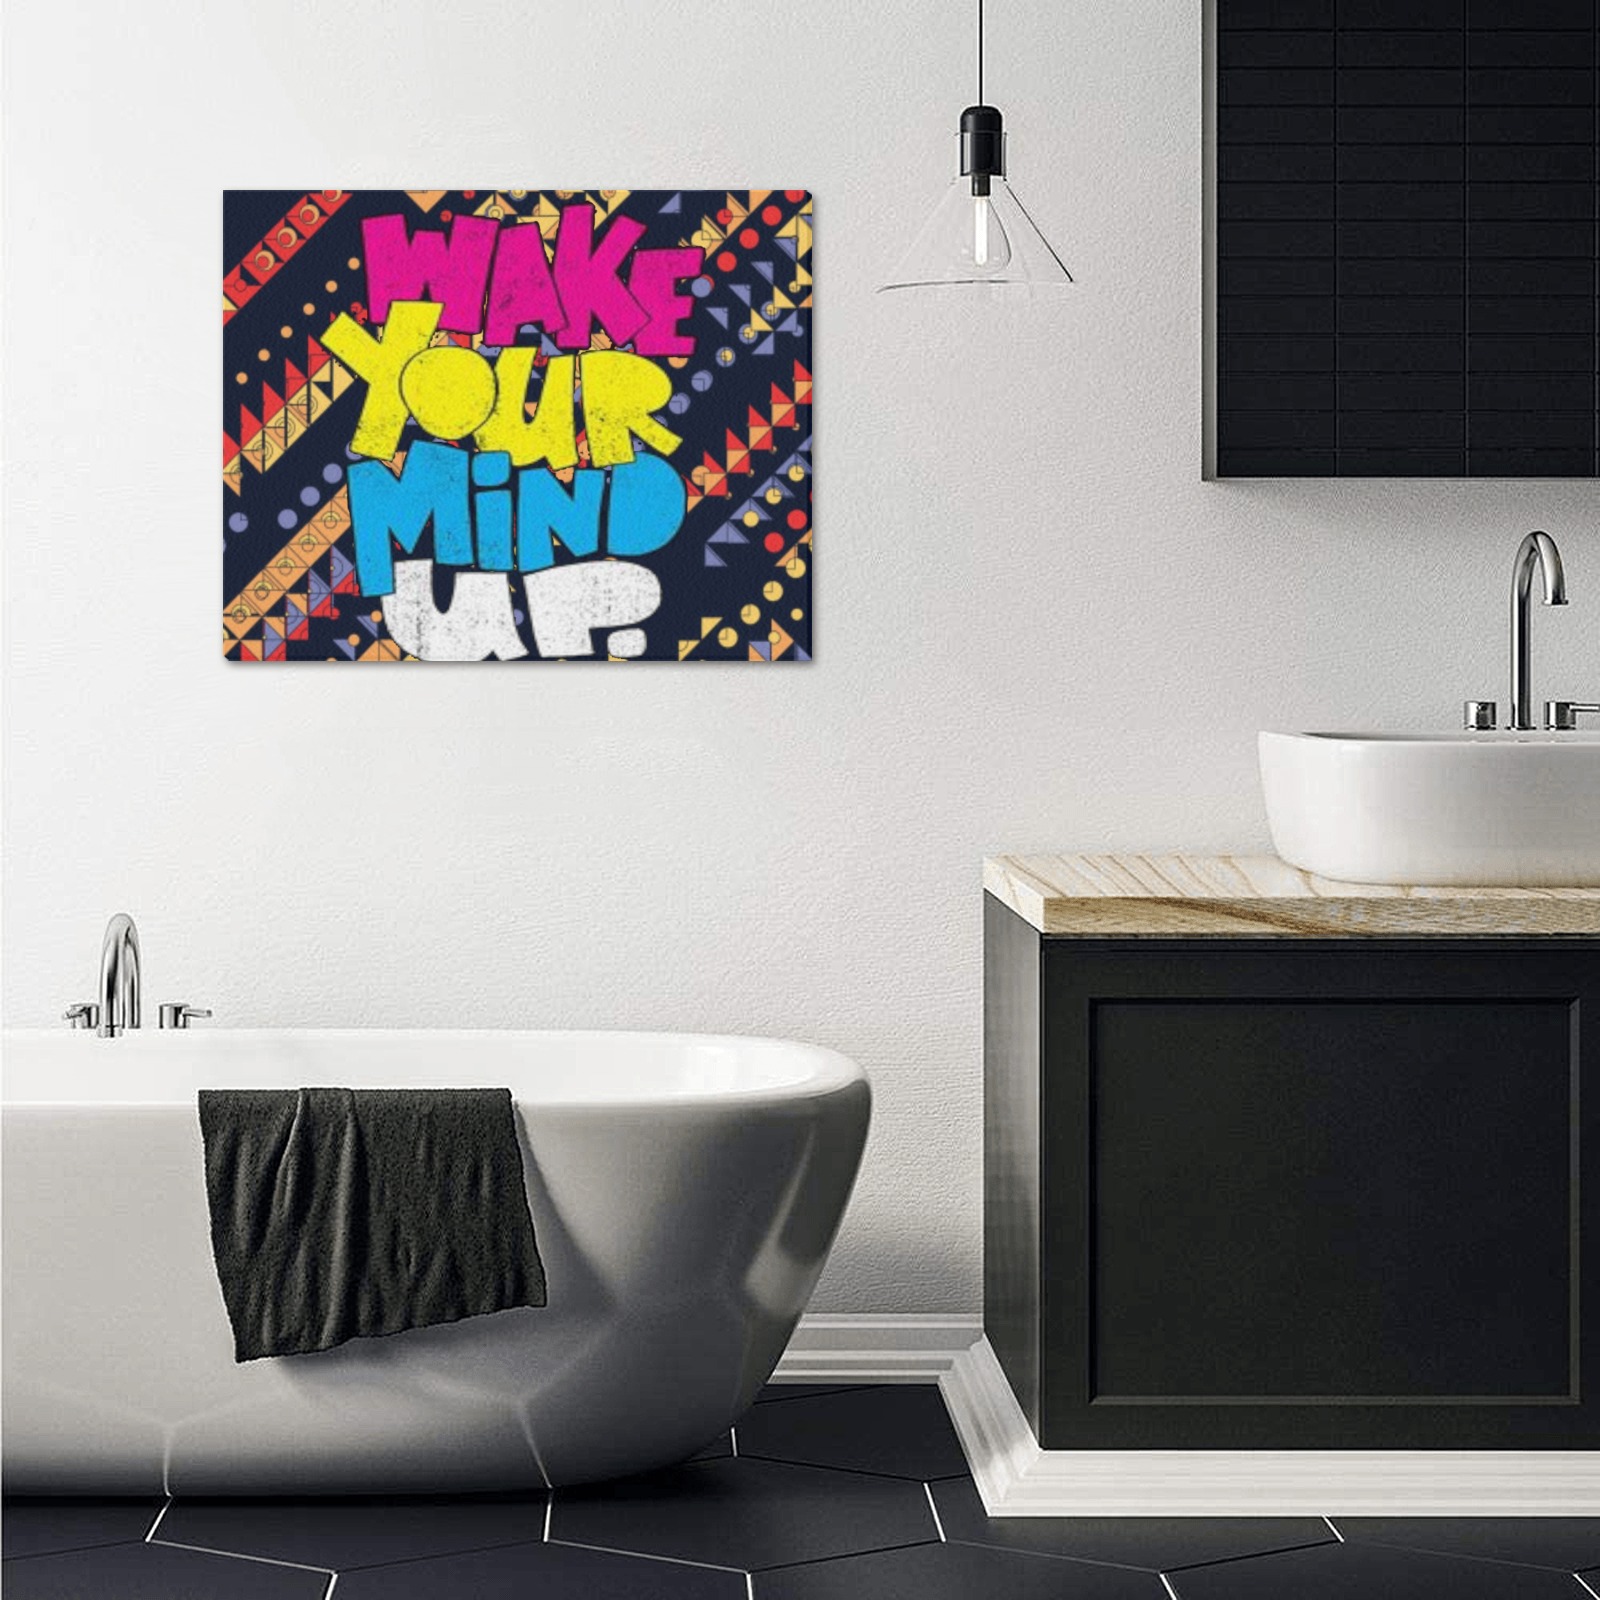 wake your mind up Frame Canvas Print 20"x16"